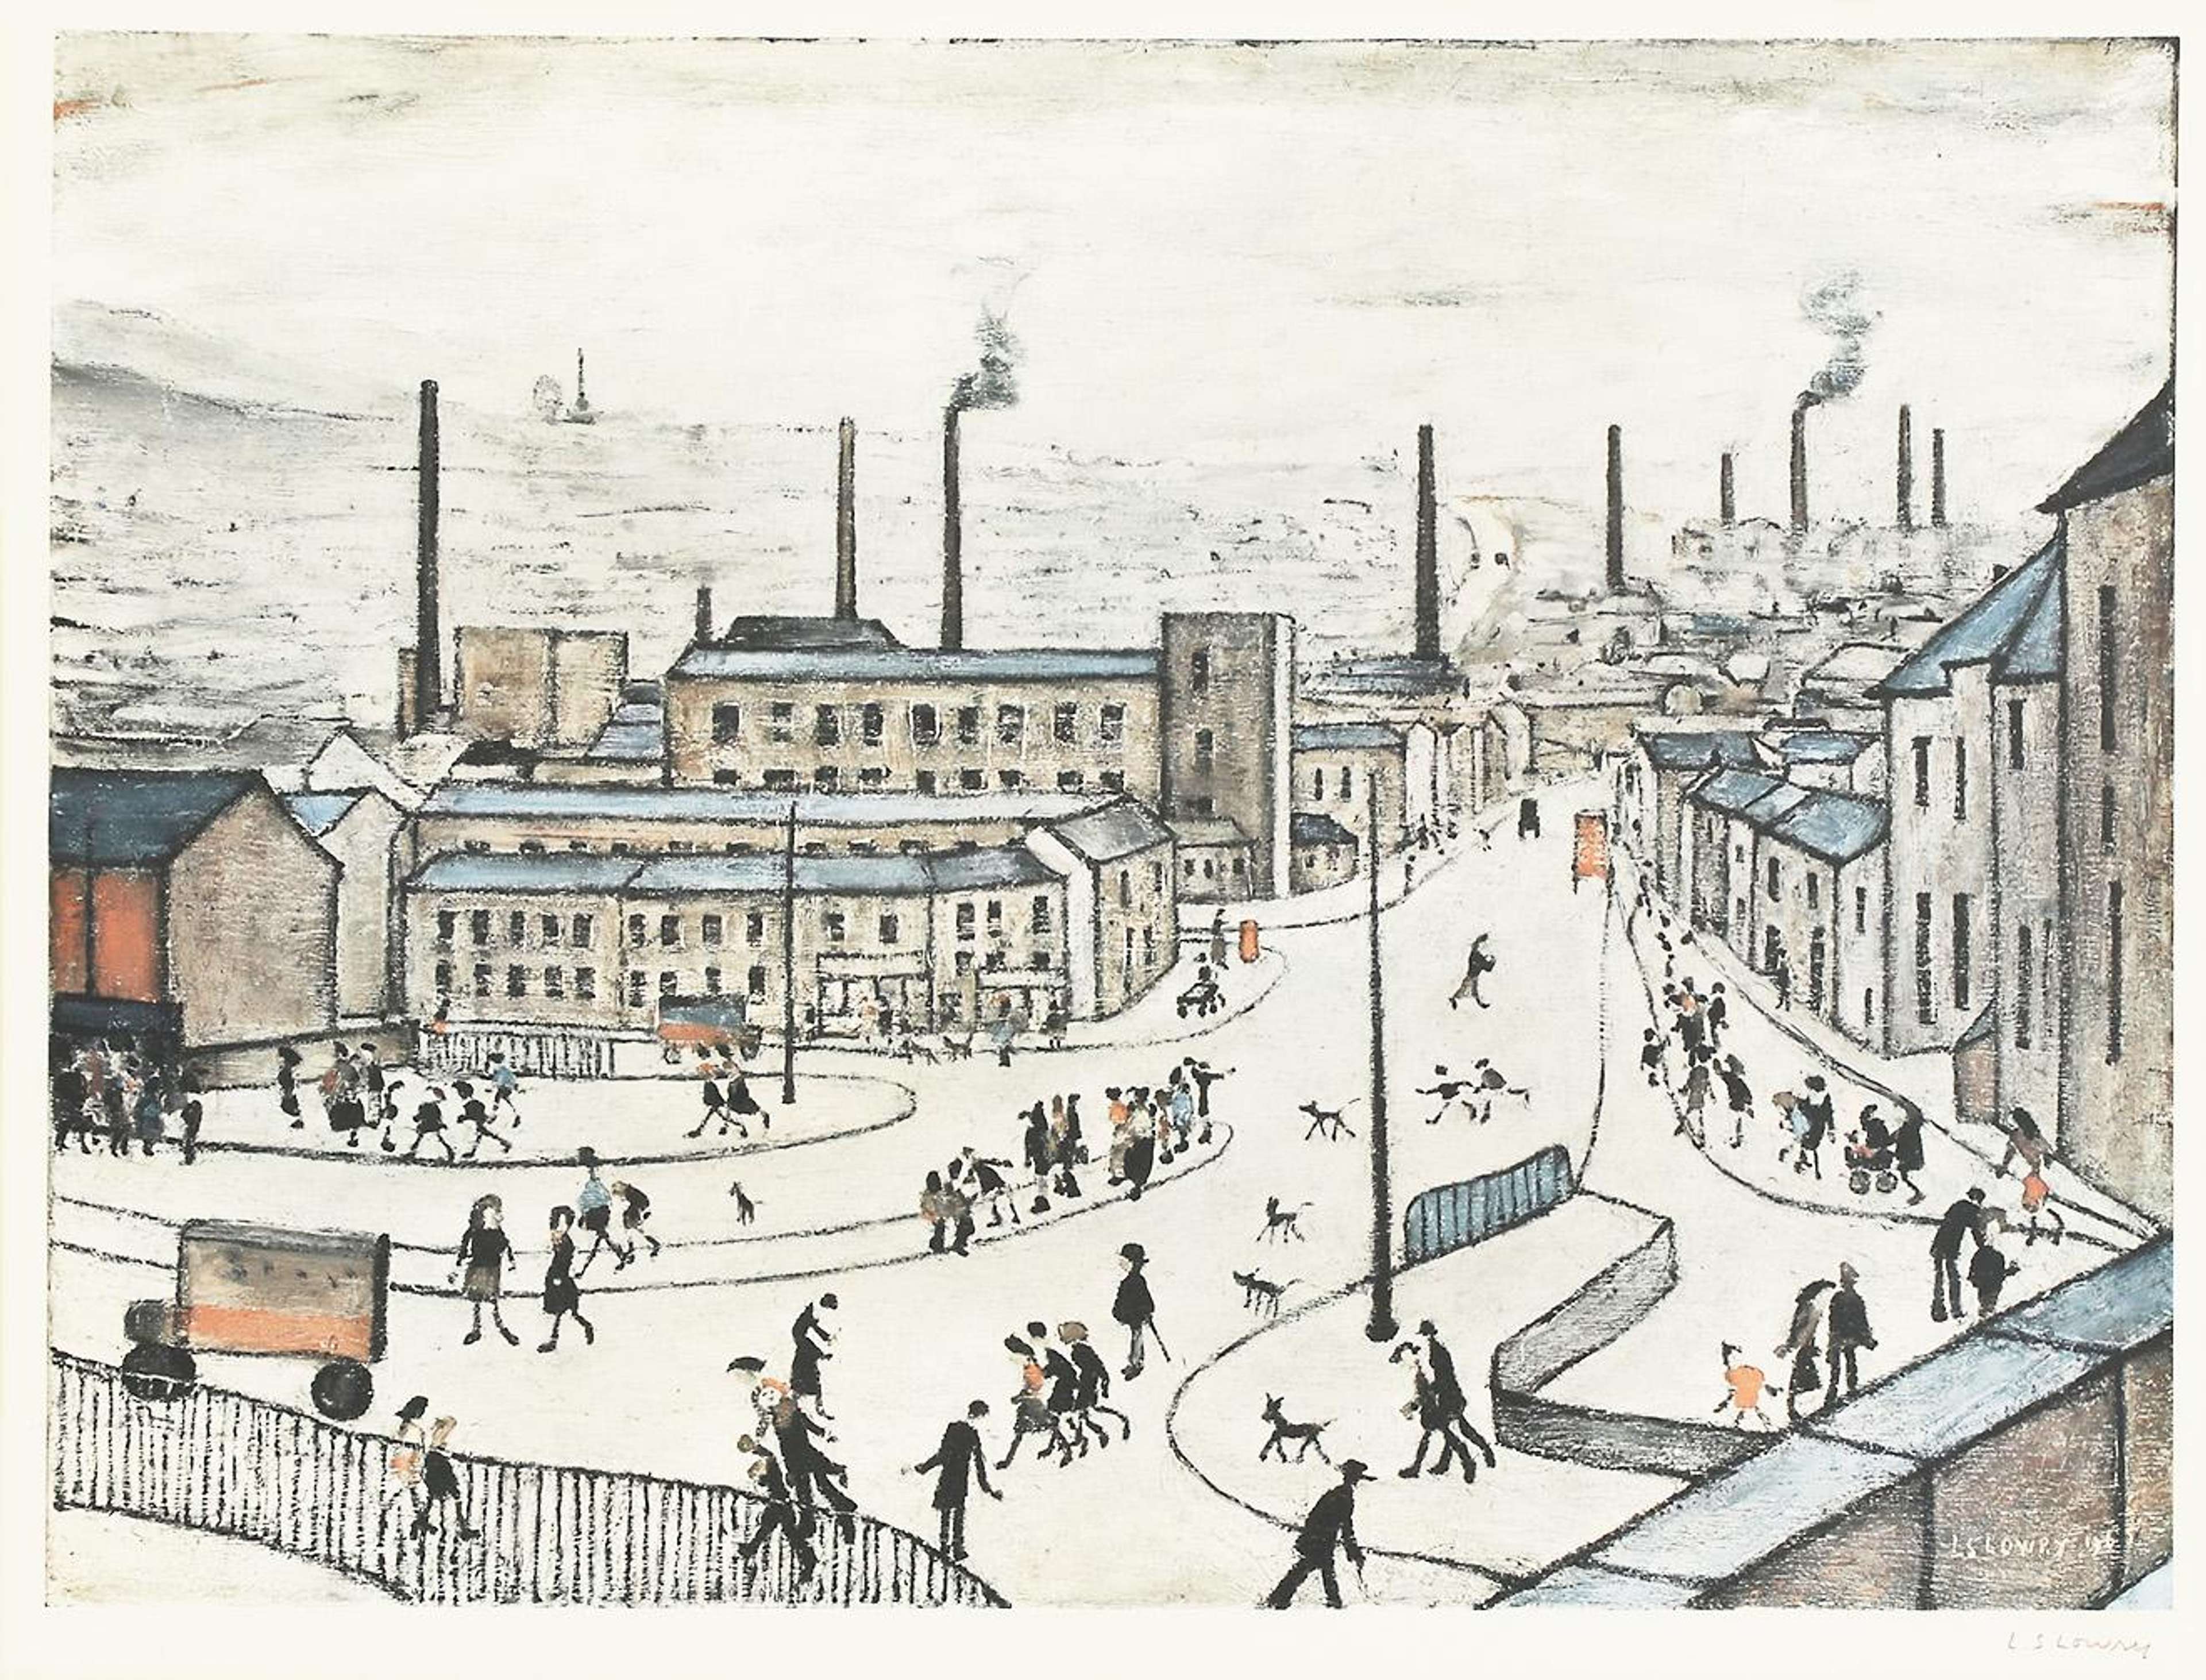 L.S. Lowry's Huddersfield.  Landscape view of English town featuring people walking in he busy street among factory buildings